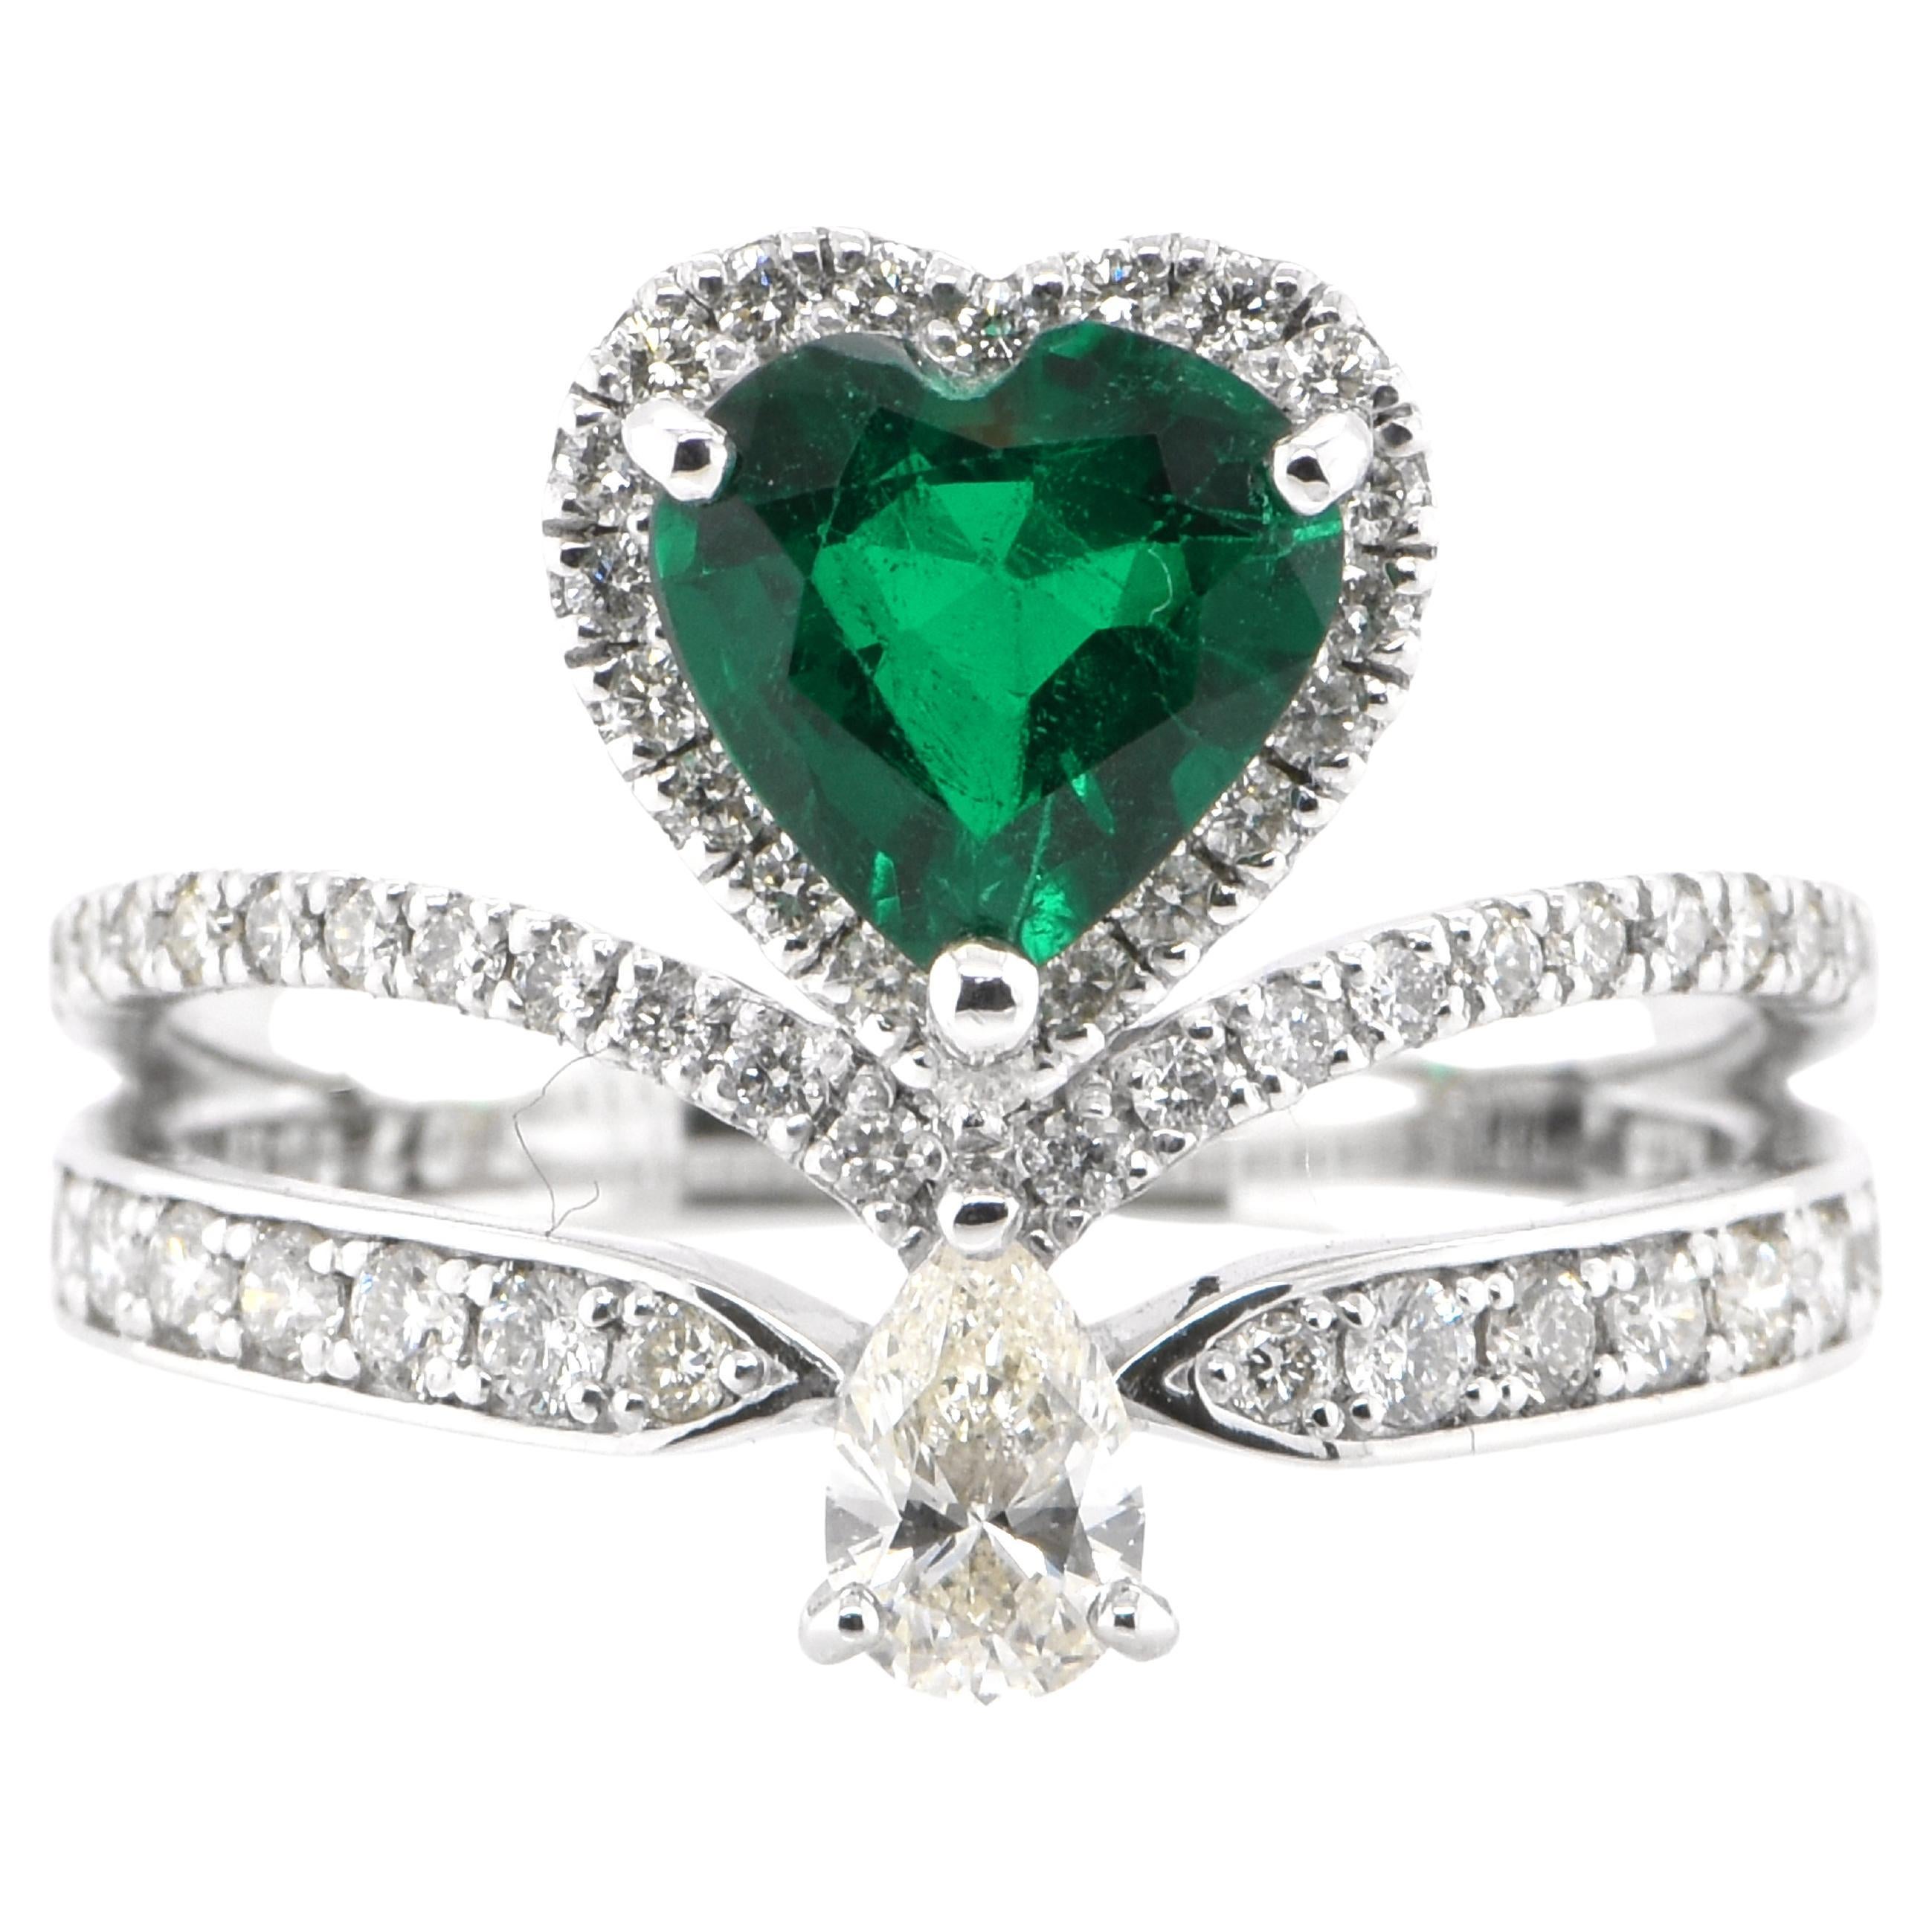 1.07 Carat Natural Heart Shape Emerald and Diamond Cocktail Ring Set in Platinum